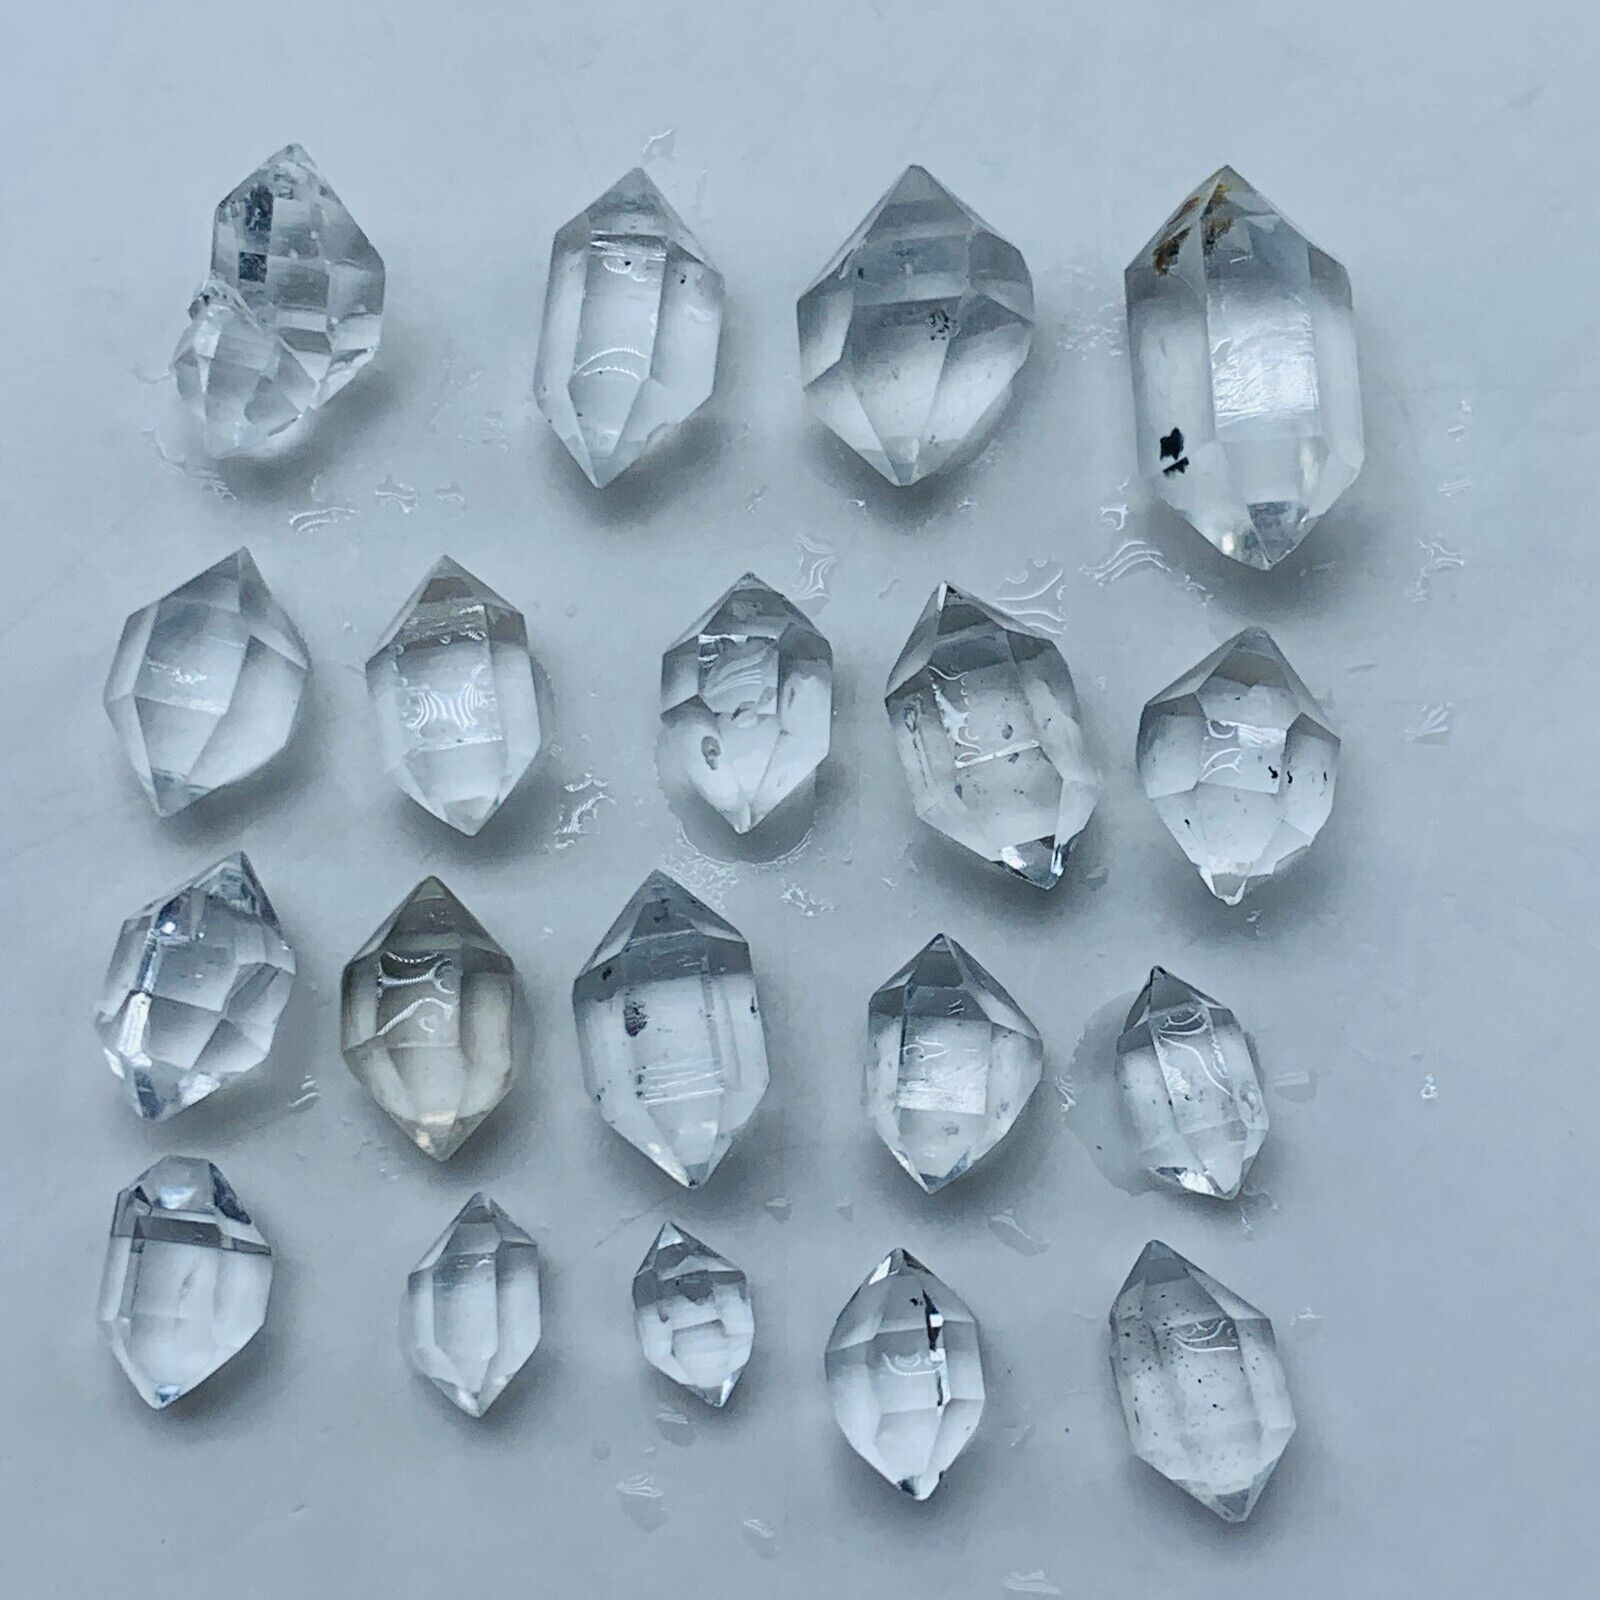 19pc Herkimer Diamond AAA small 6mm to 13mm Top gem crystal From-NY 23ct